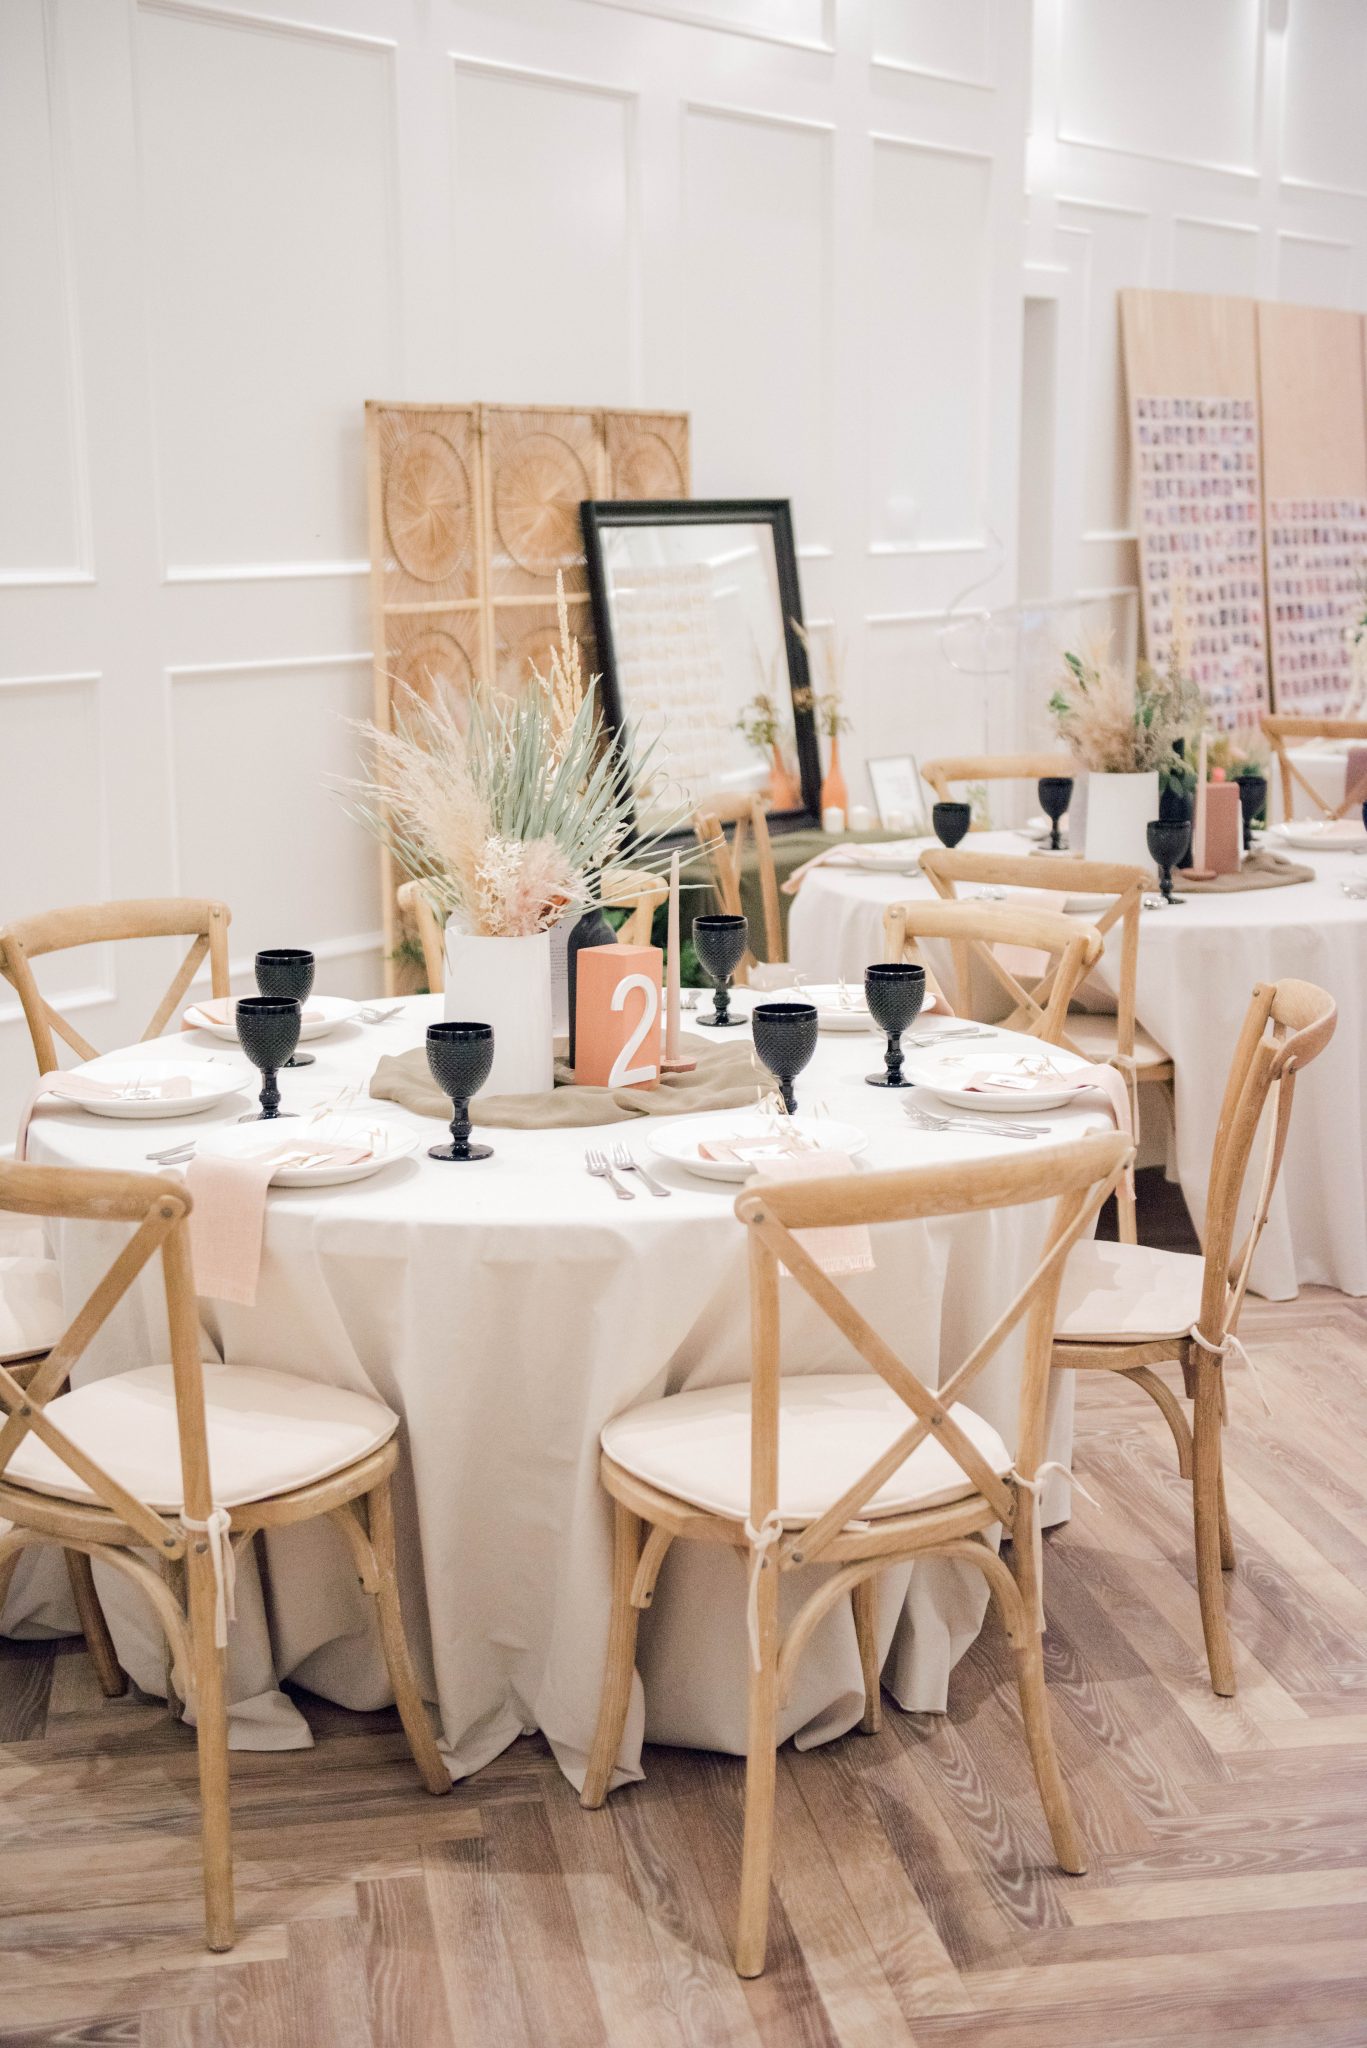 Tropical Meets Celestial in This Calgary Wedding Reception at Flores & Pine - featured on Bronte Bride